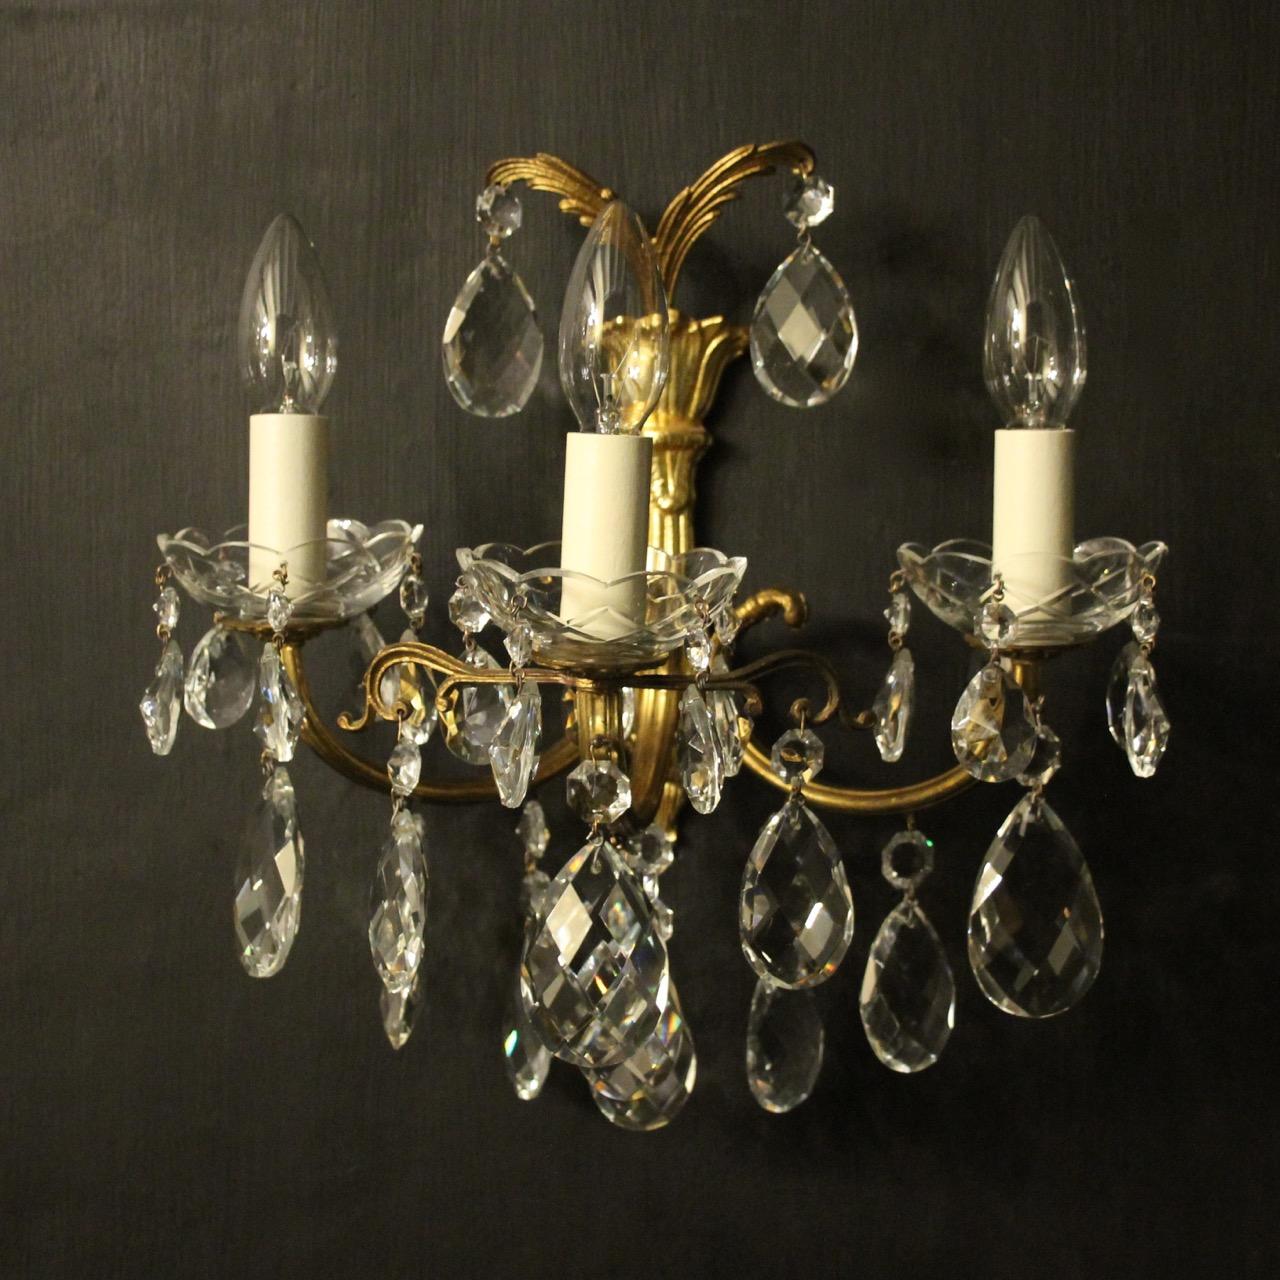 A French pair of gilded brass and crystal triple arm antique wall lights, the leaf scrolling arms with glass bobeche drip pans, issuing from a foliated leaf backplate with twin leaf canopy, decorated overall with crystal faceted pendants. Fully